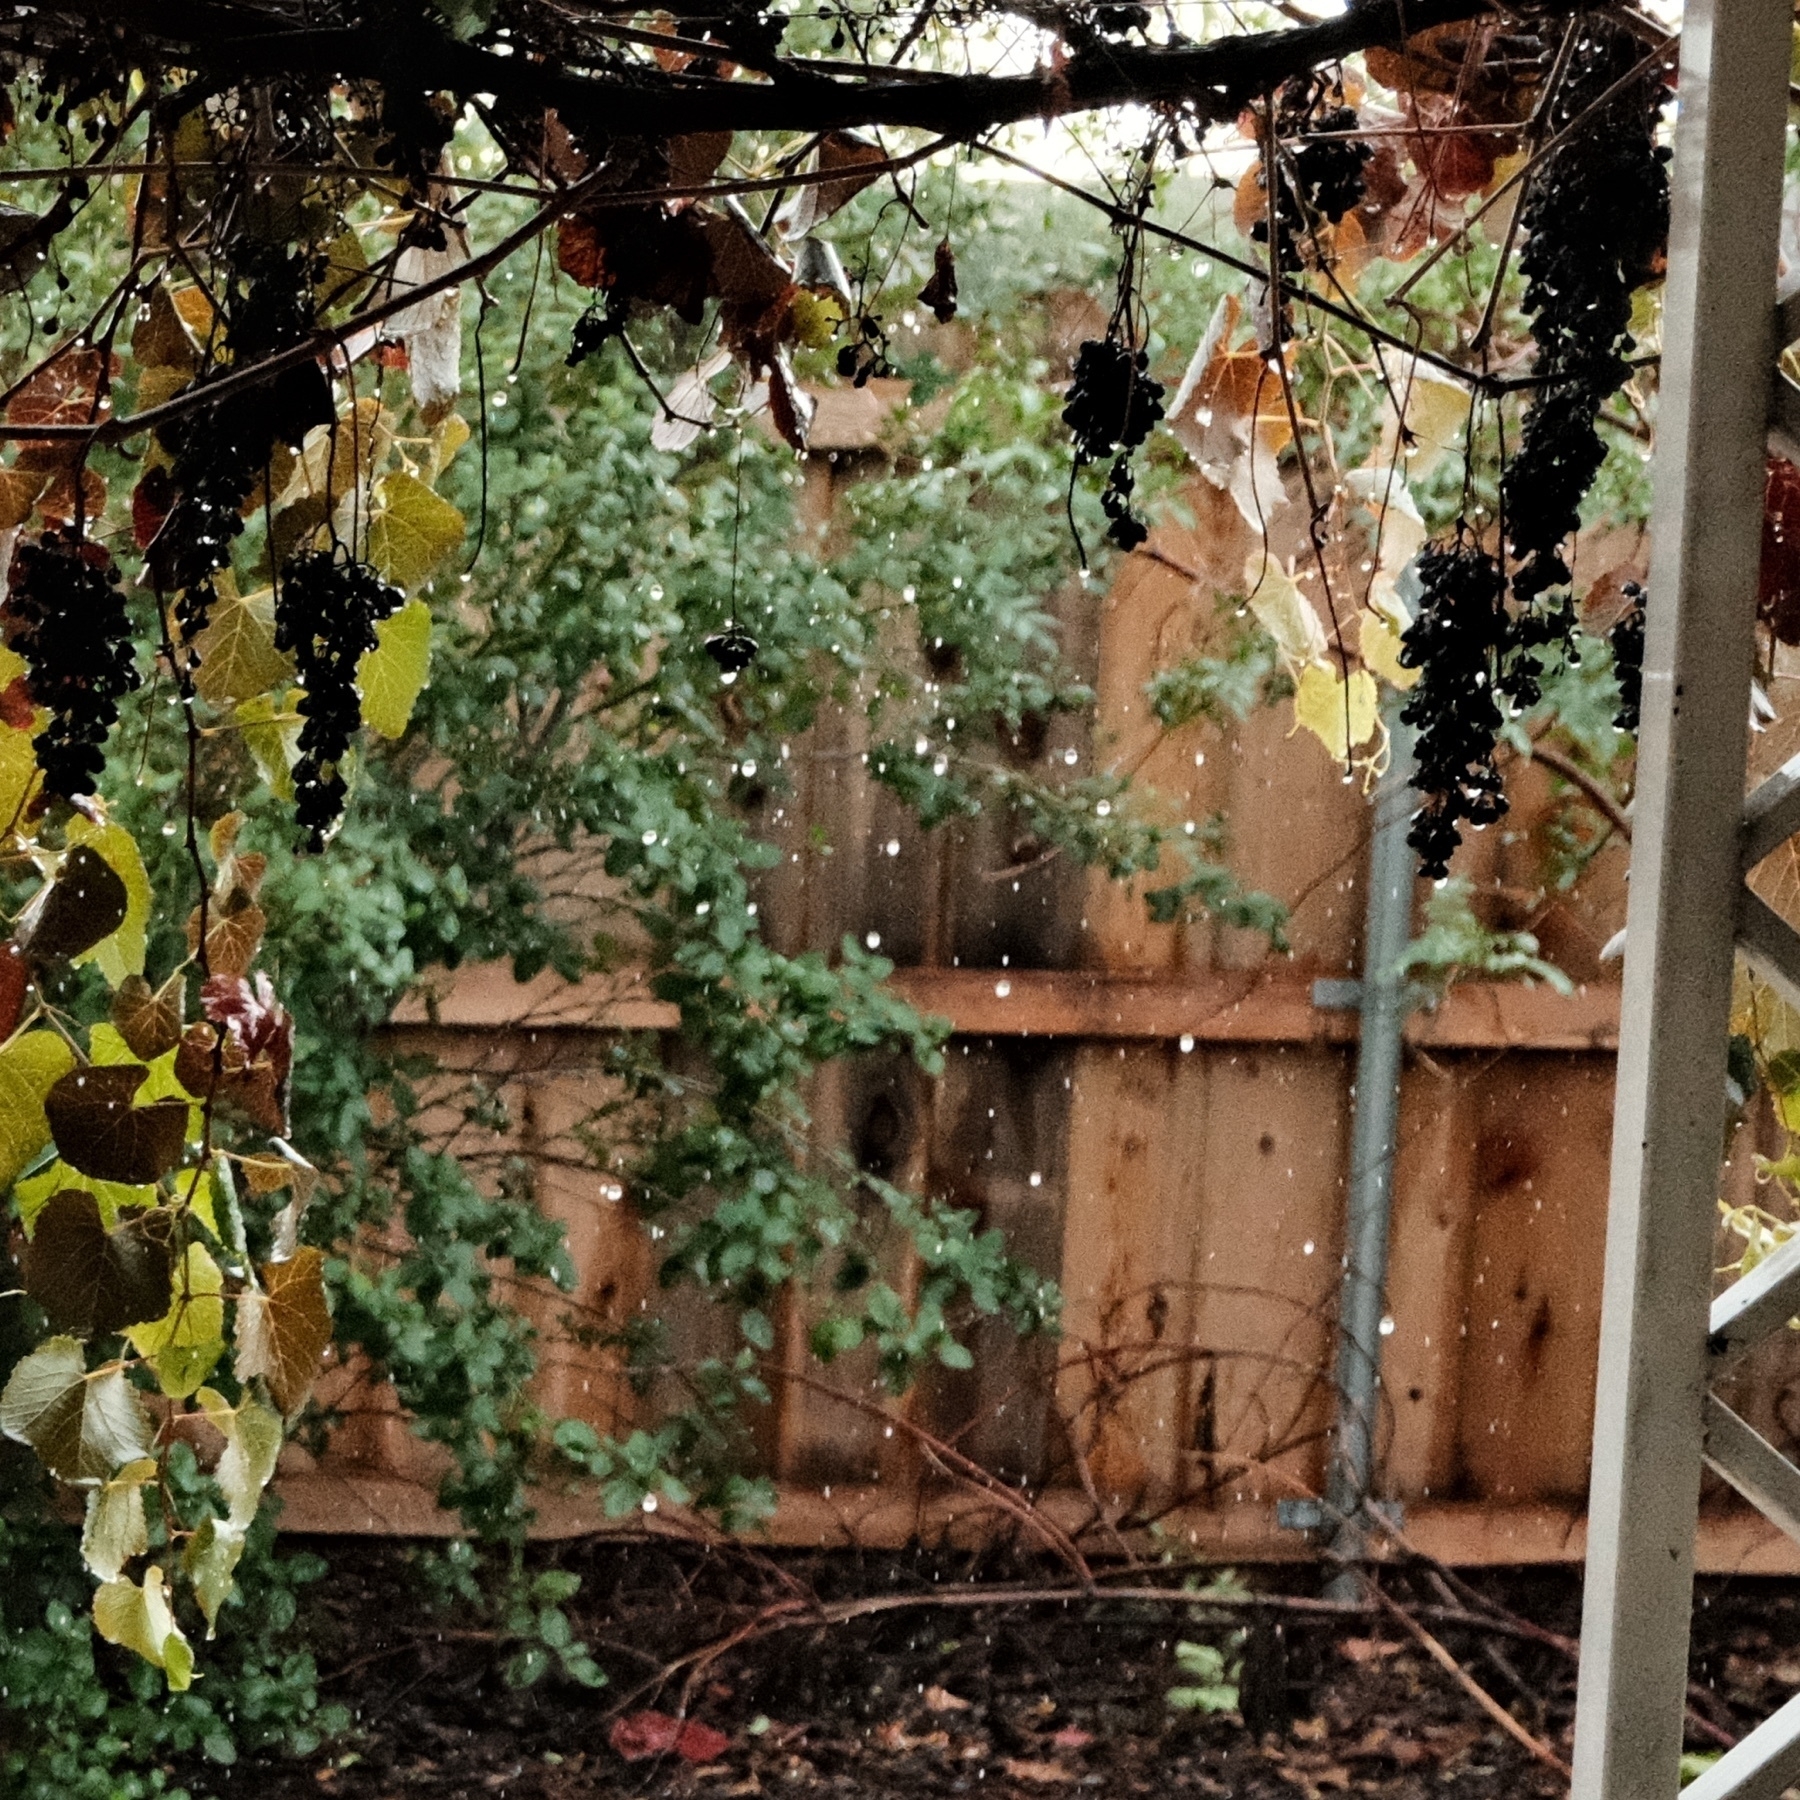 Rain drops dripping from an awning and a grape vine with dark, almost black, dessicated grapes. Vibrant native vegetation is slightly blurred in the background.